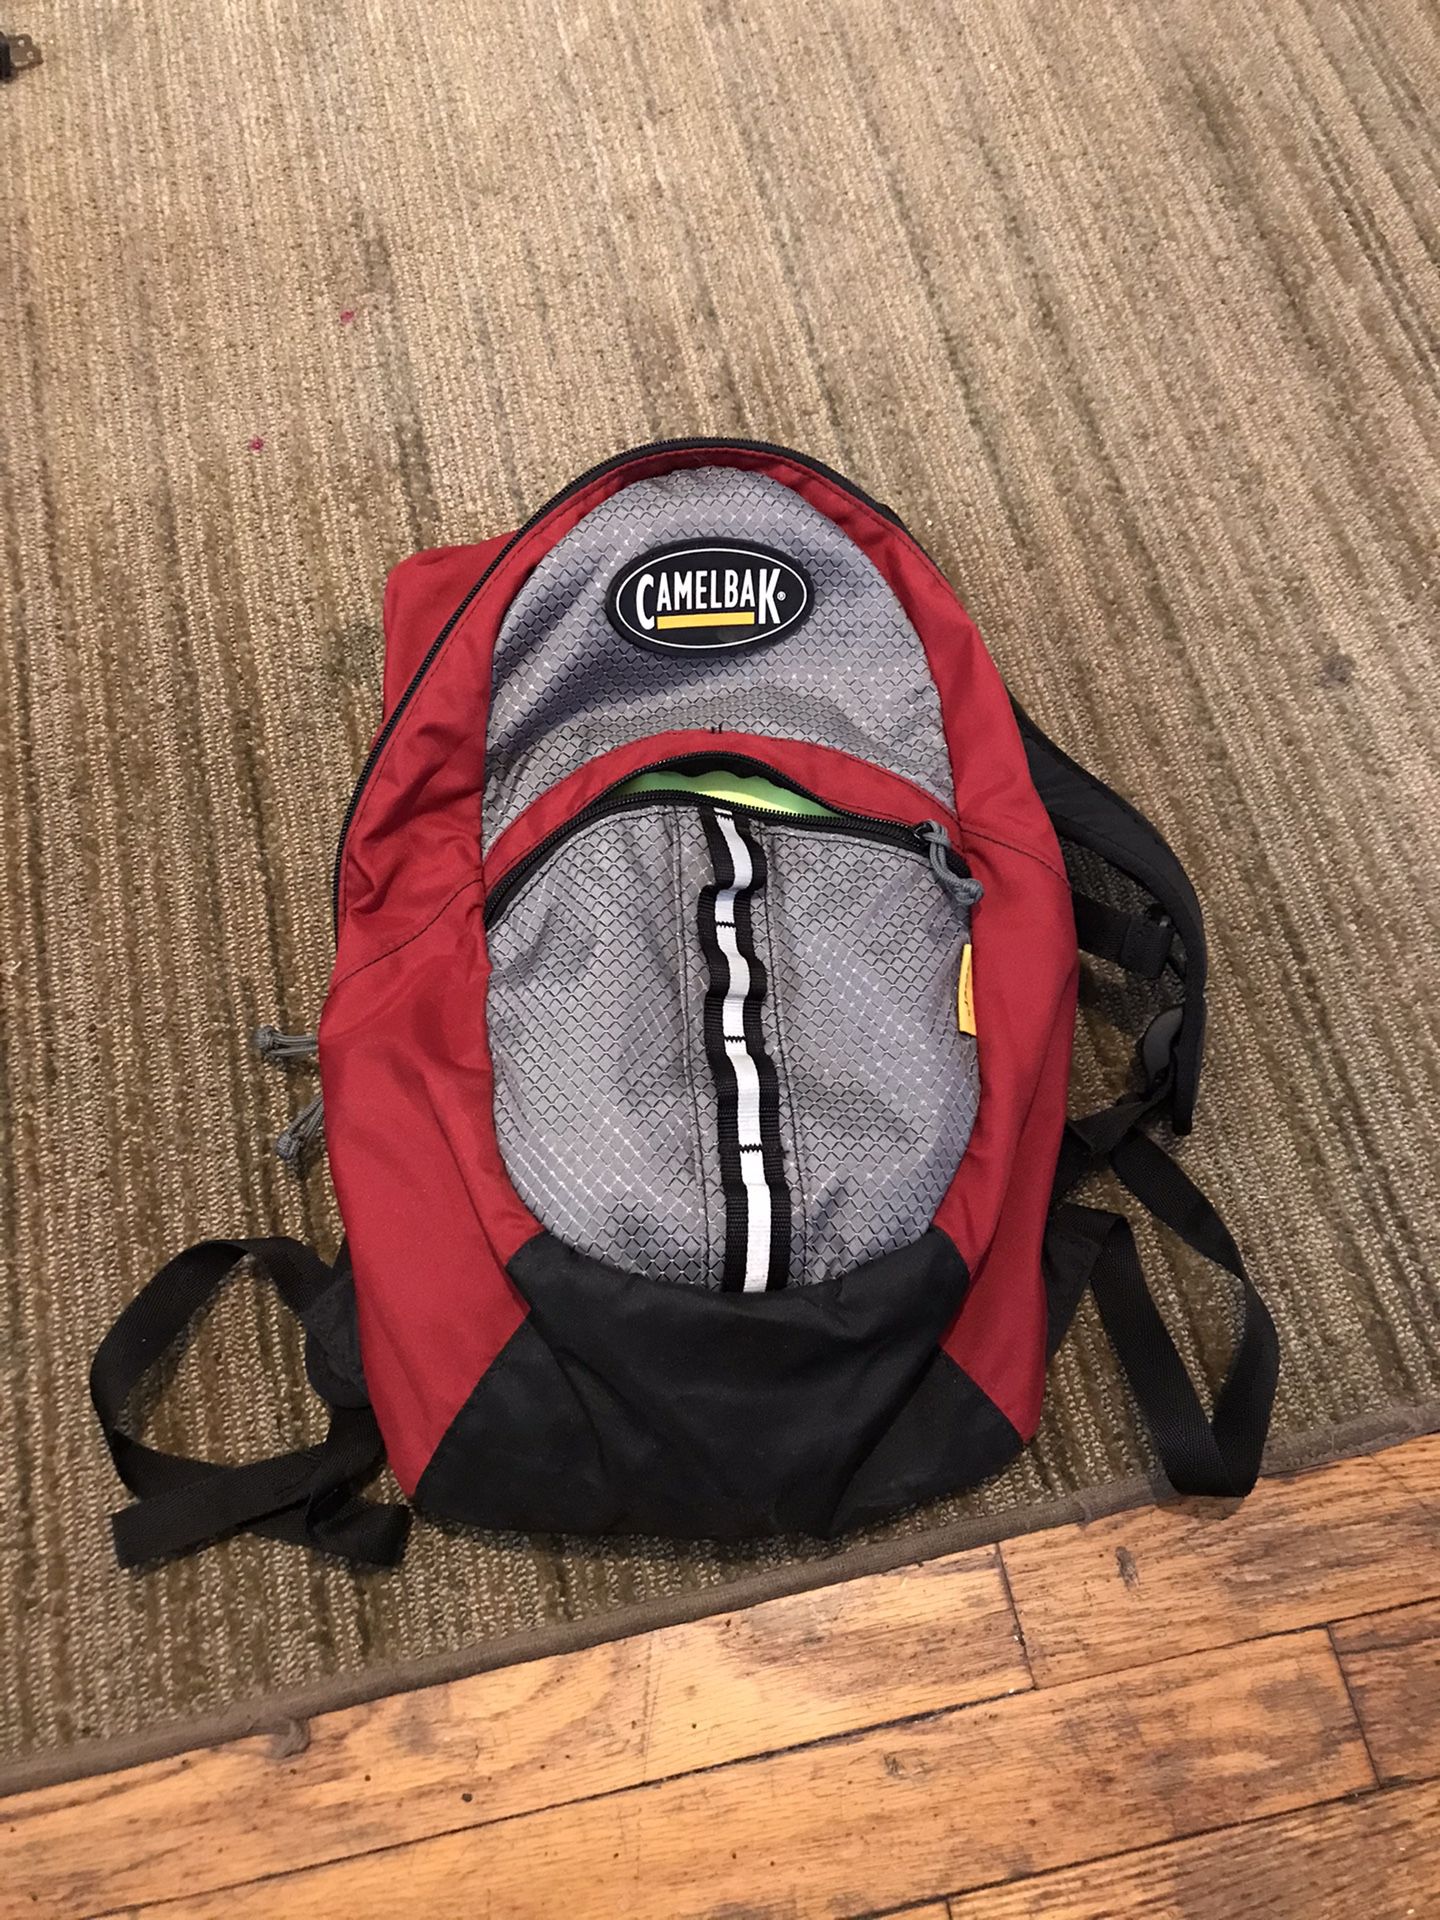 Camelback with bladder excellent condition never used